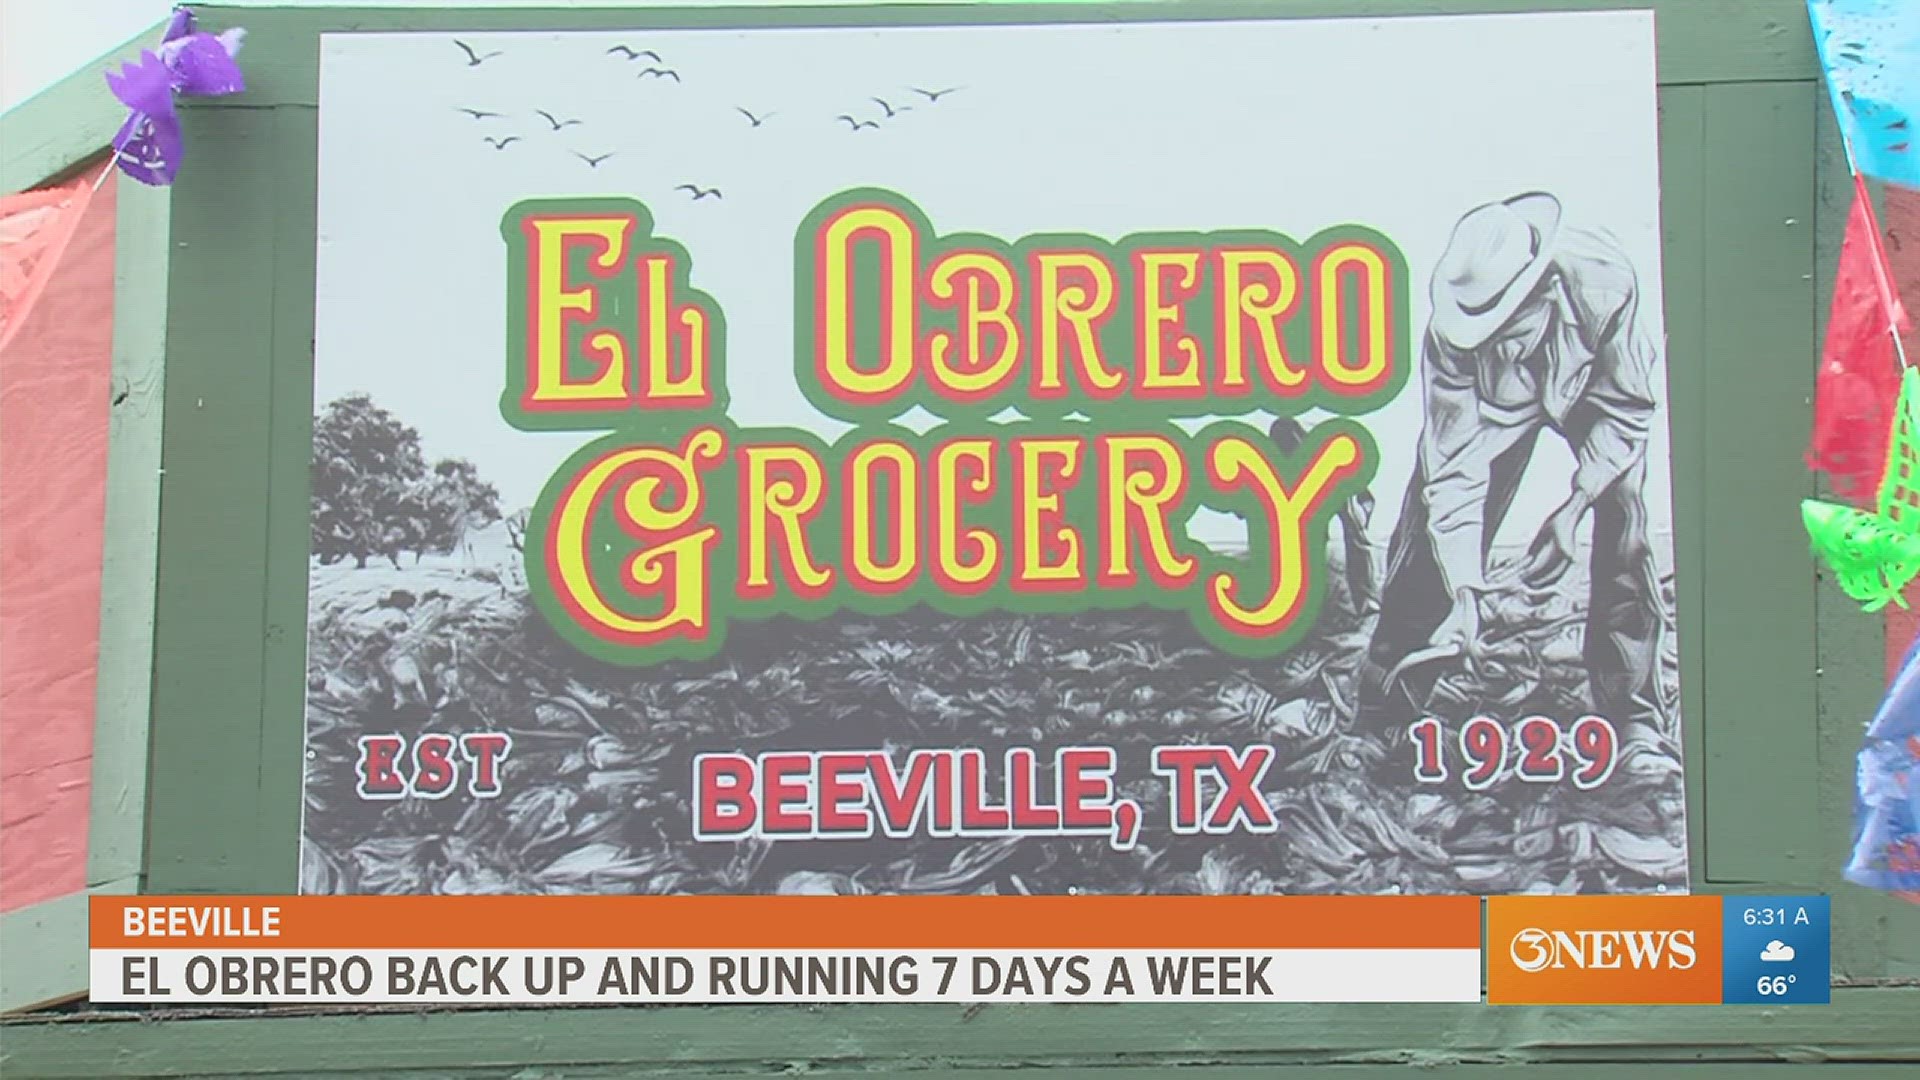 The store has been part of the fabric of Beeville's West Side for decades, helping poor migrant farm workers feed their families when times were lean.